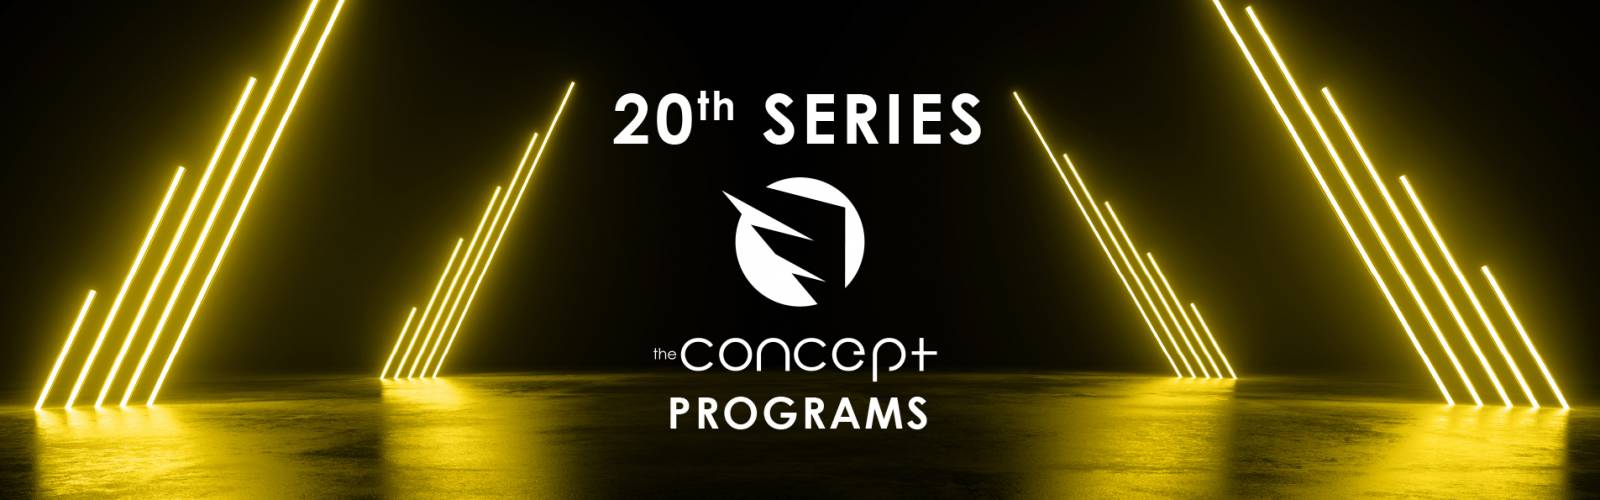 20th official theConcept Summit